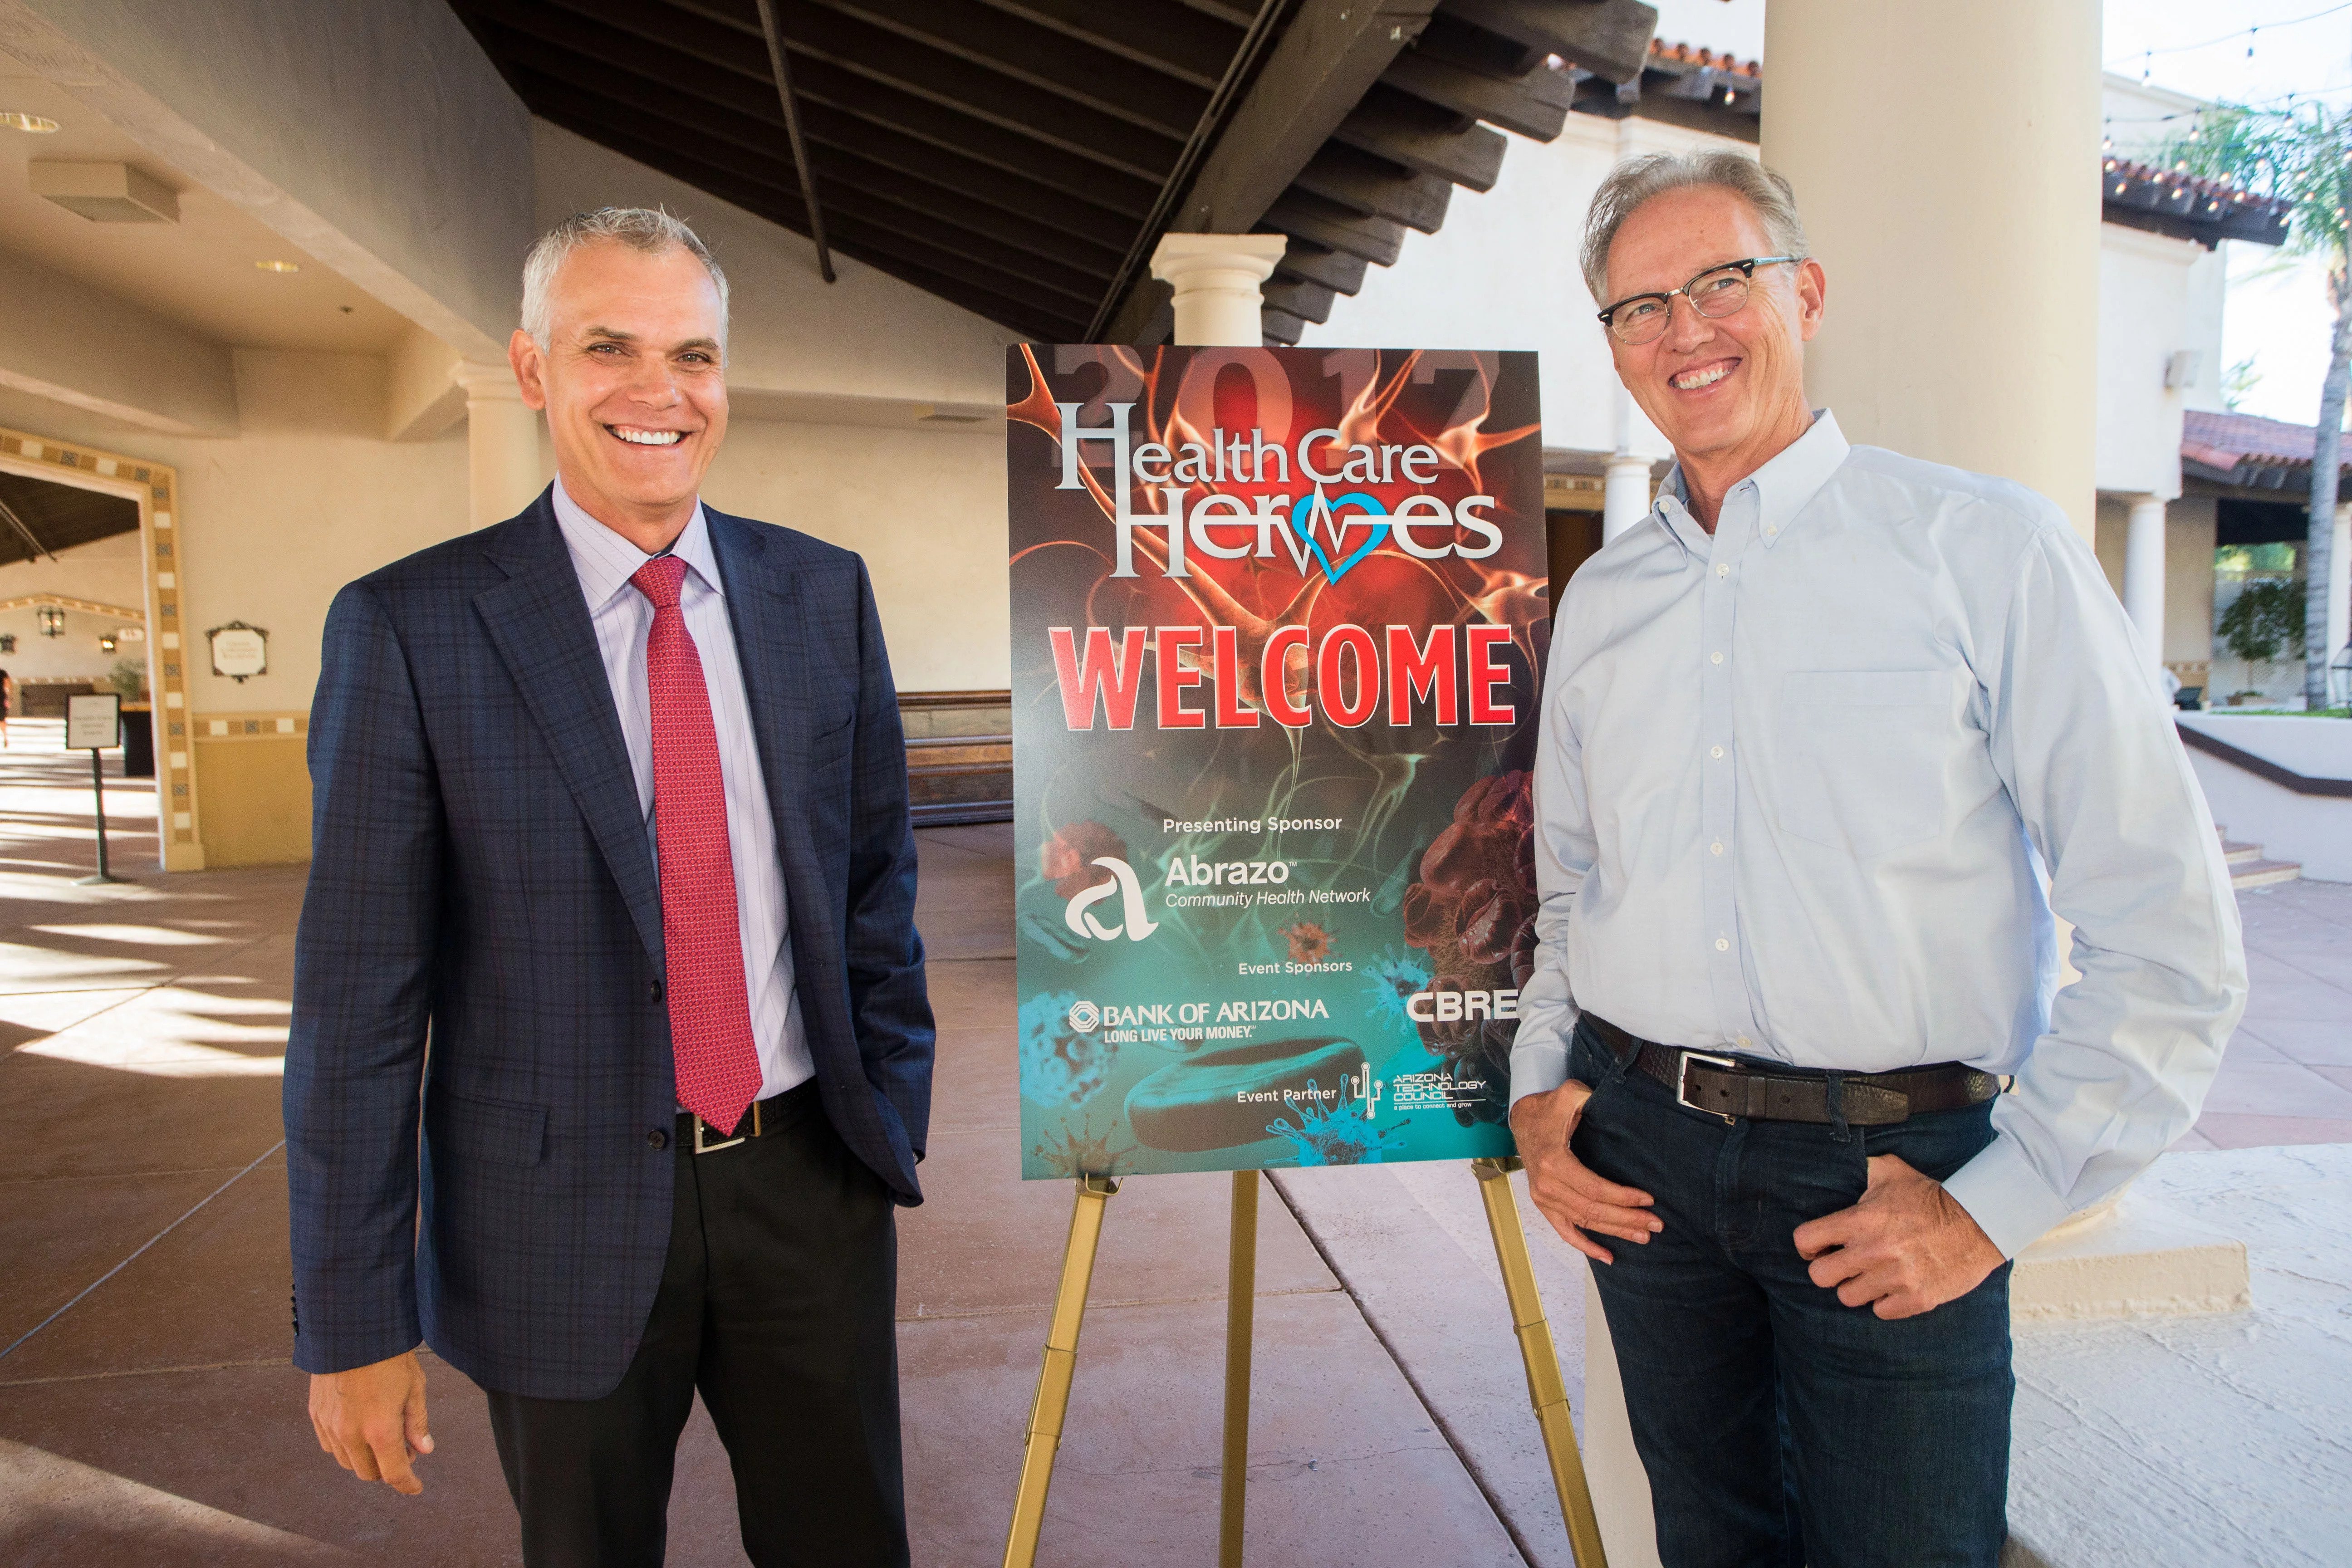 Phoenix Business Journal Chooses Dr. David Berg as Innovator of the Year at Healthcare Heroes Awards